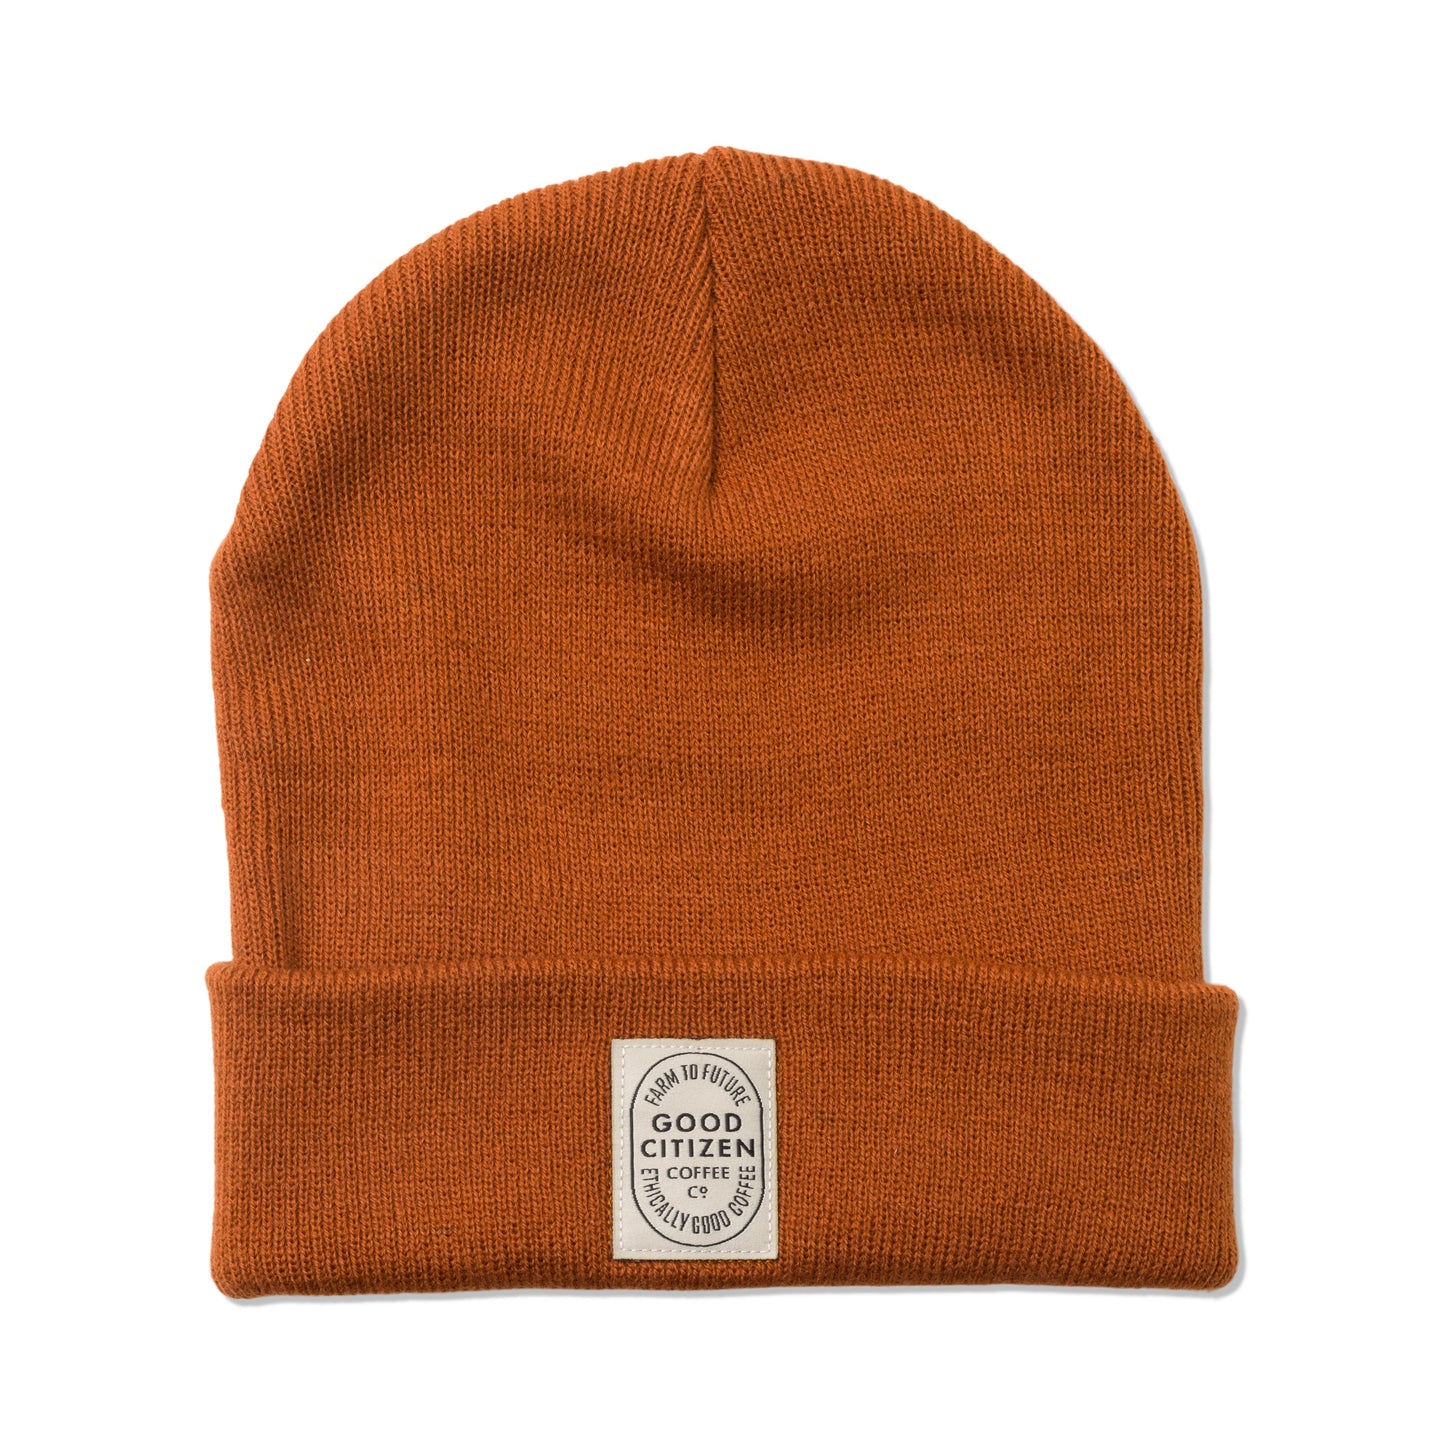 orange-red beanie with small white logo which says "Good Citizen" on the bottom which is folded up